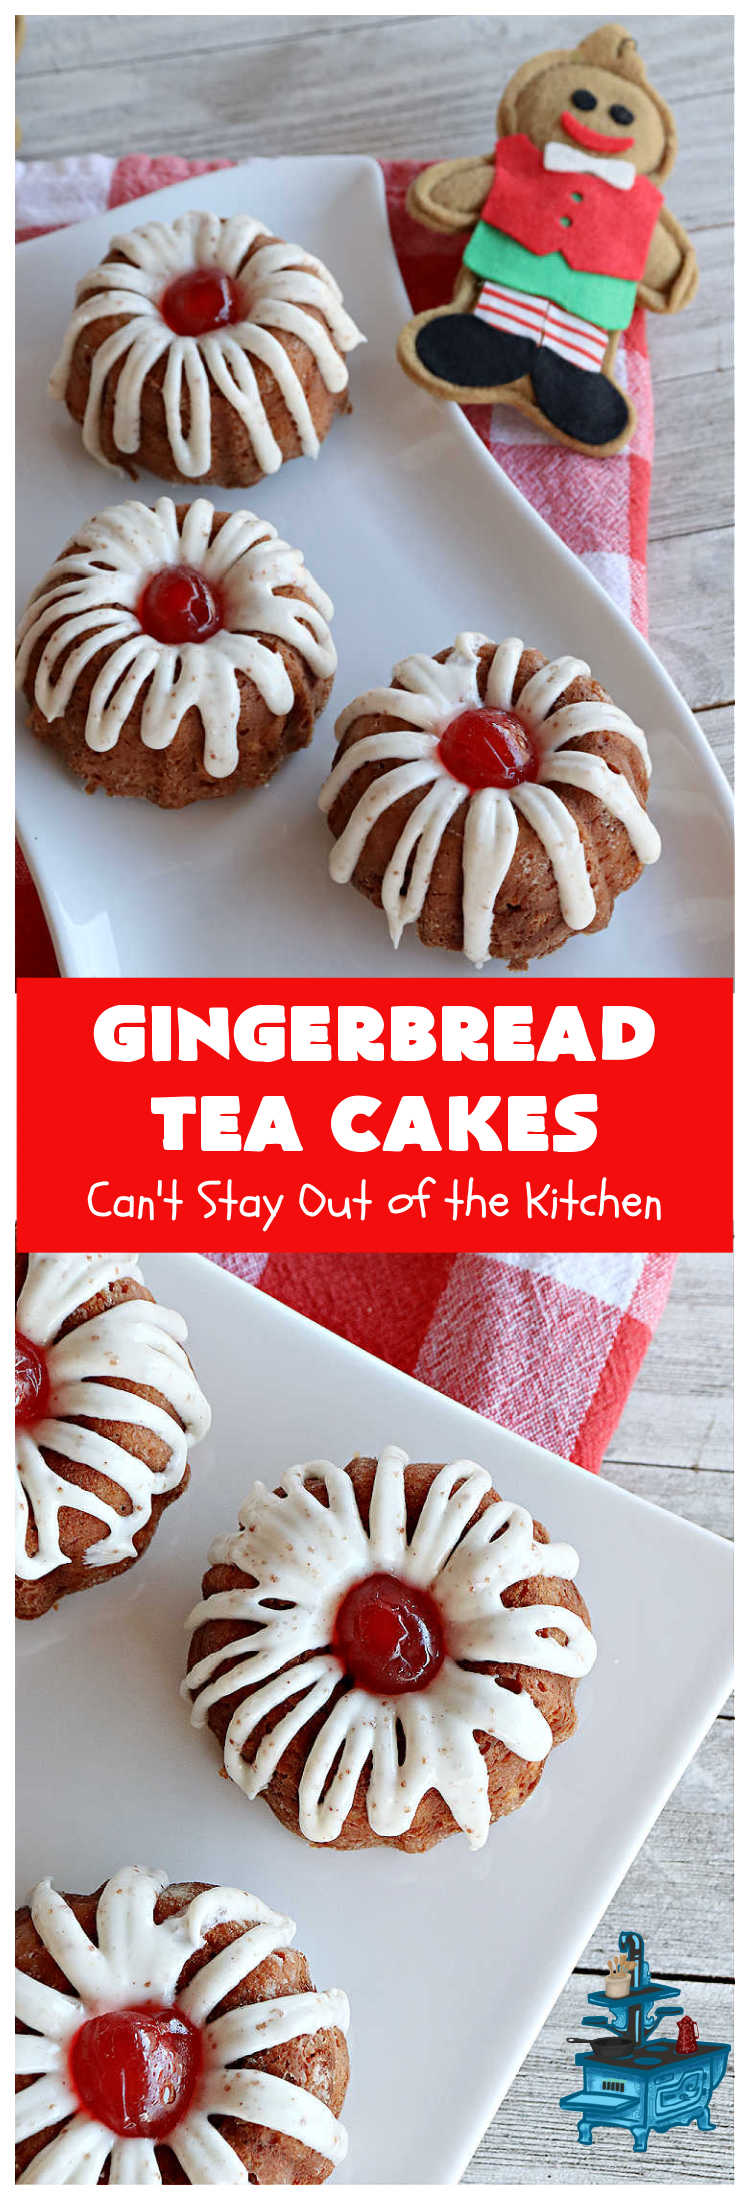 Gingerbread Tea Cakes | Can't Stay Out of the Kitchen | these luscious #TeaCakes are made with a #Gingerbread mix. They include #walnuts & vanilla chips. The icing is canned #CinnamonToastCrunch icing! Every bite is spectacular & will have you swooning! #holiday #baking #Christmas #dessert #cake #GingerbreadTeaCakesGingerbread Tea Cakes | Can't Stay Out of the Kitchen | these luscious #TeaCakes are made with a #Gingerbread mix. They include #walnuts & vanilla chips. The icing is canned #CinnamonToastCrunch icing! Every bite is spectacular & will have you swooning! #holiday #baking #Christmas #dessert #cake #GingerbreadTeaCakes